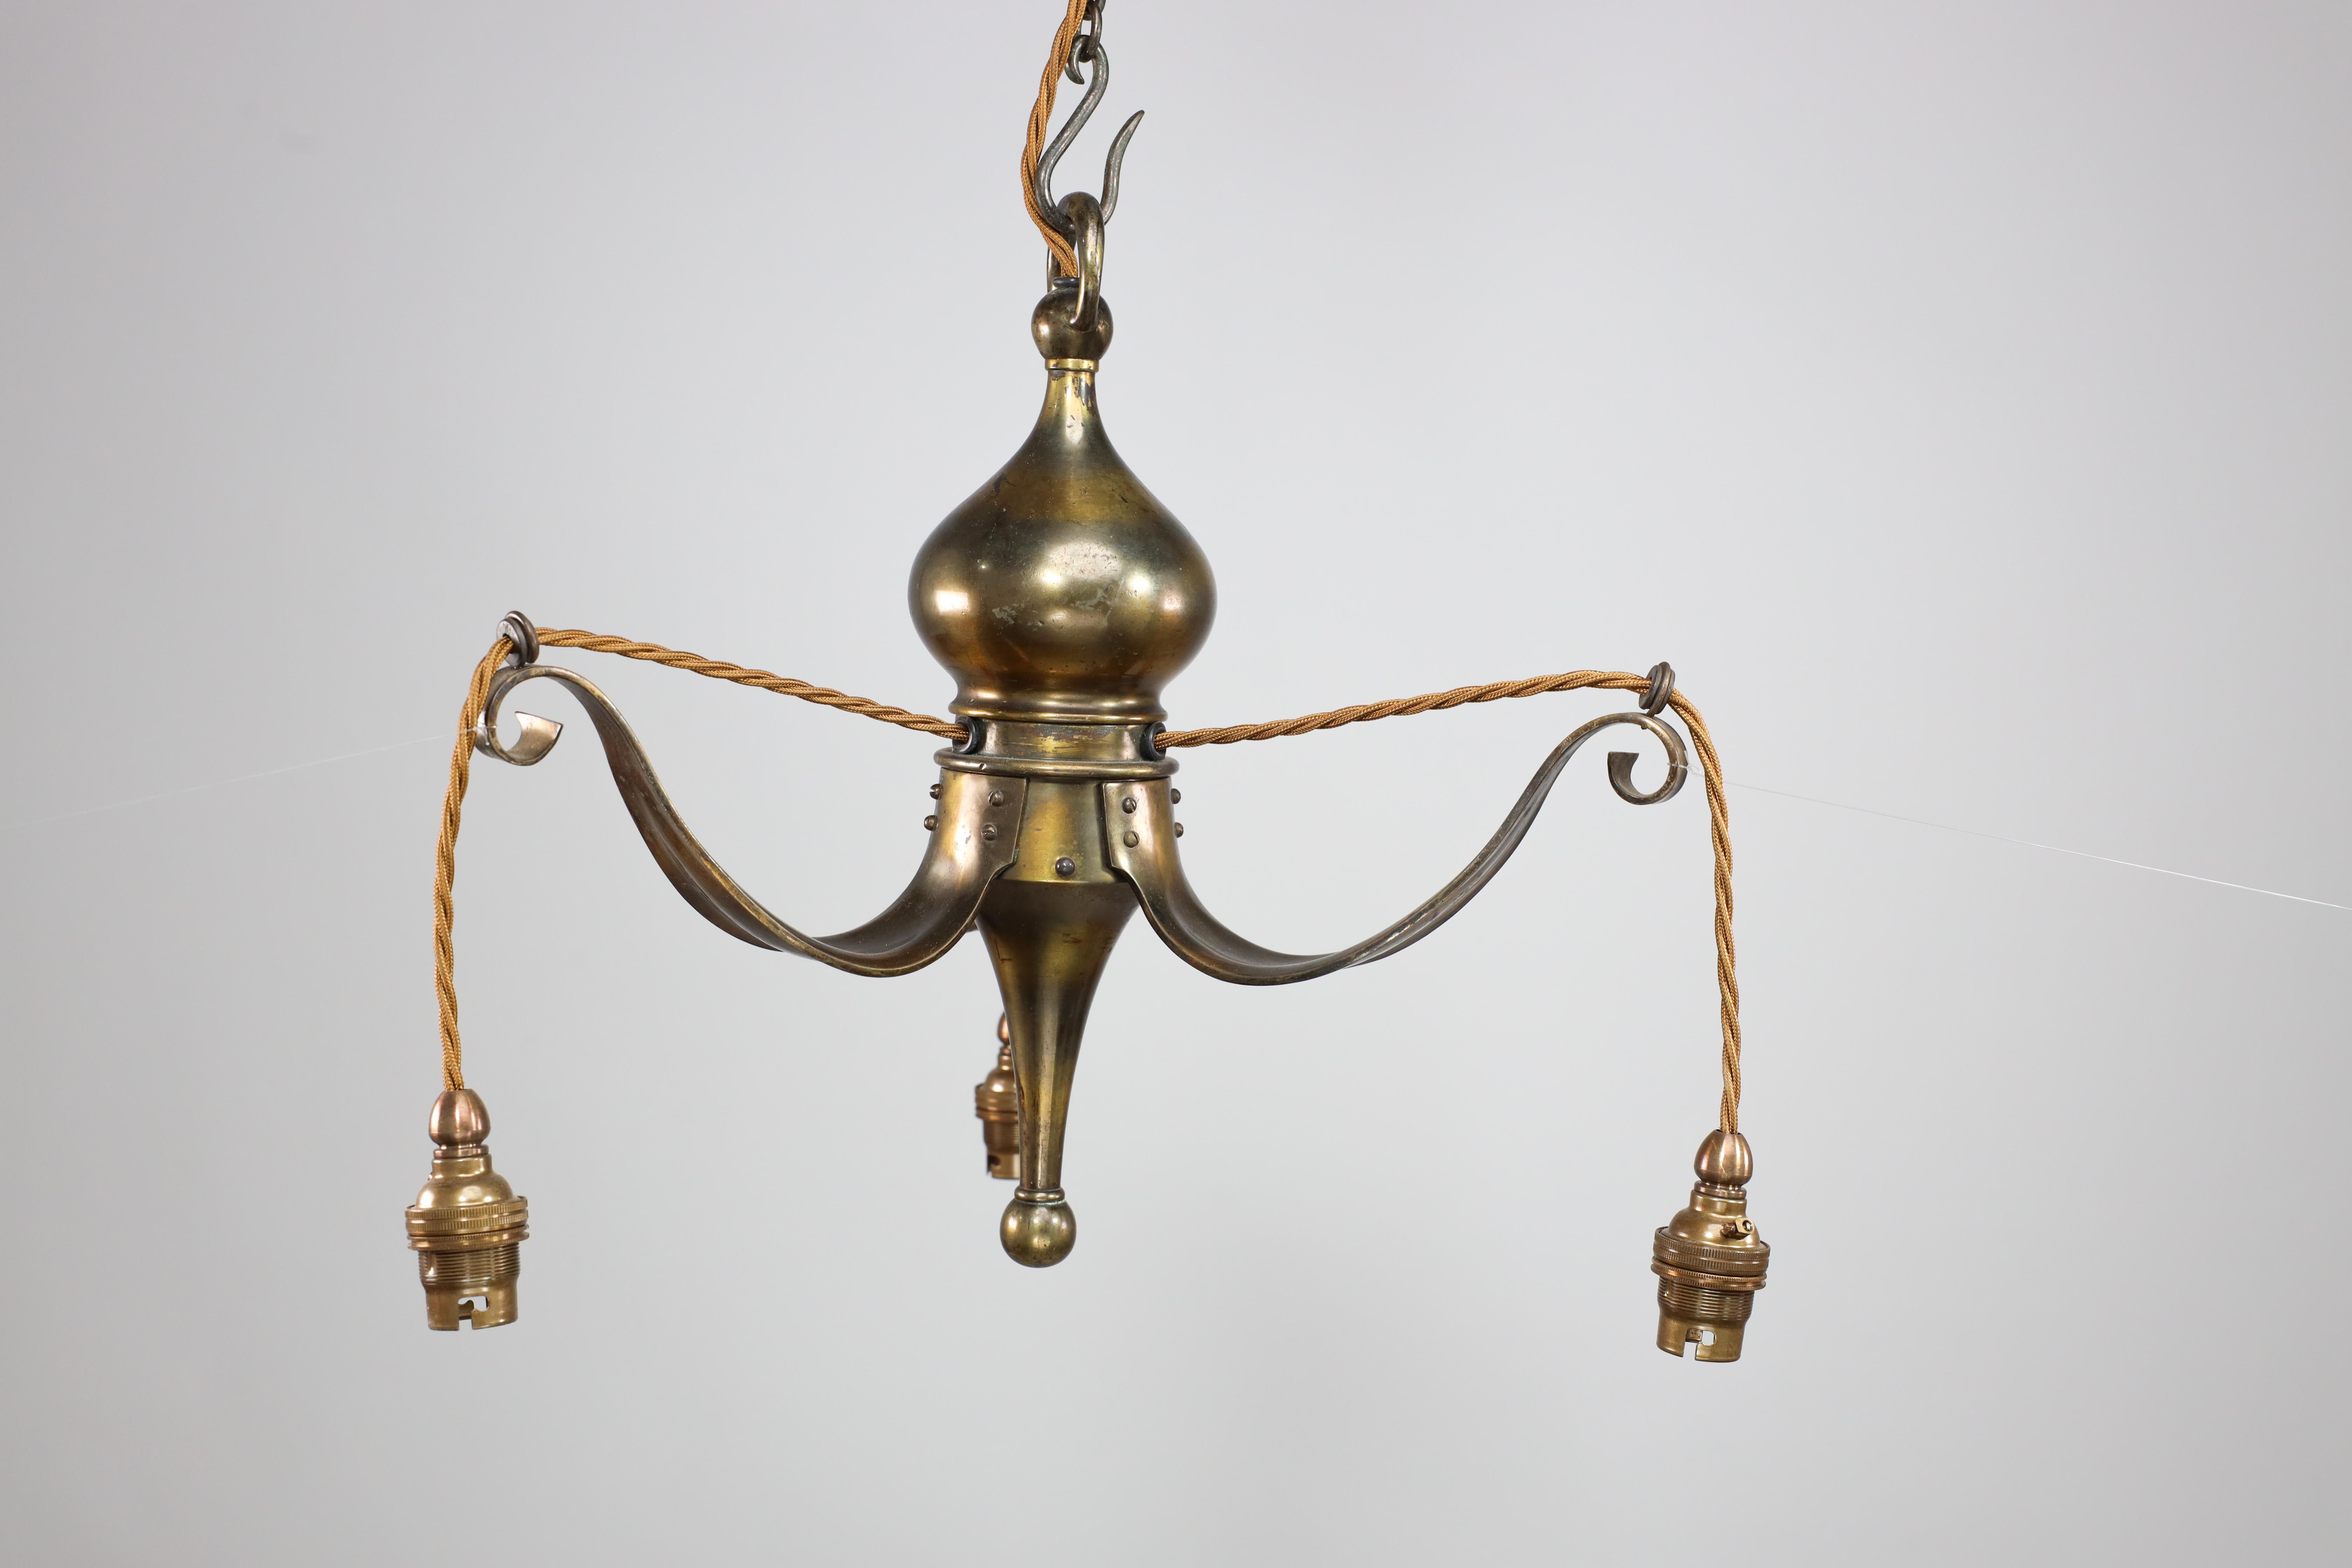 Birmingham Guild of Handicraft. An Arts and Crafts brass ceiling light or chandelier with three curved arms all hand riveted to the main bulbous body with an elongated turned finial to the base.